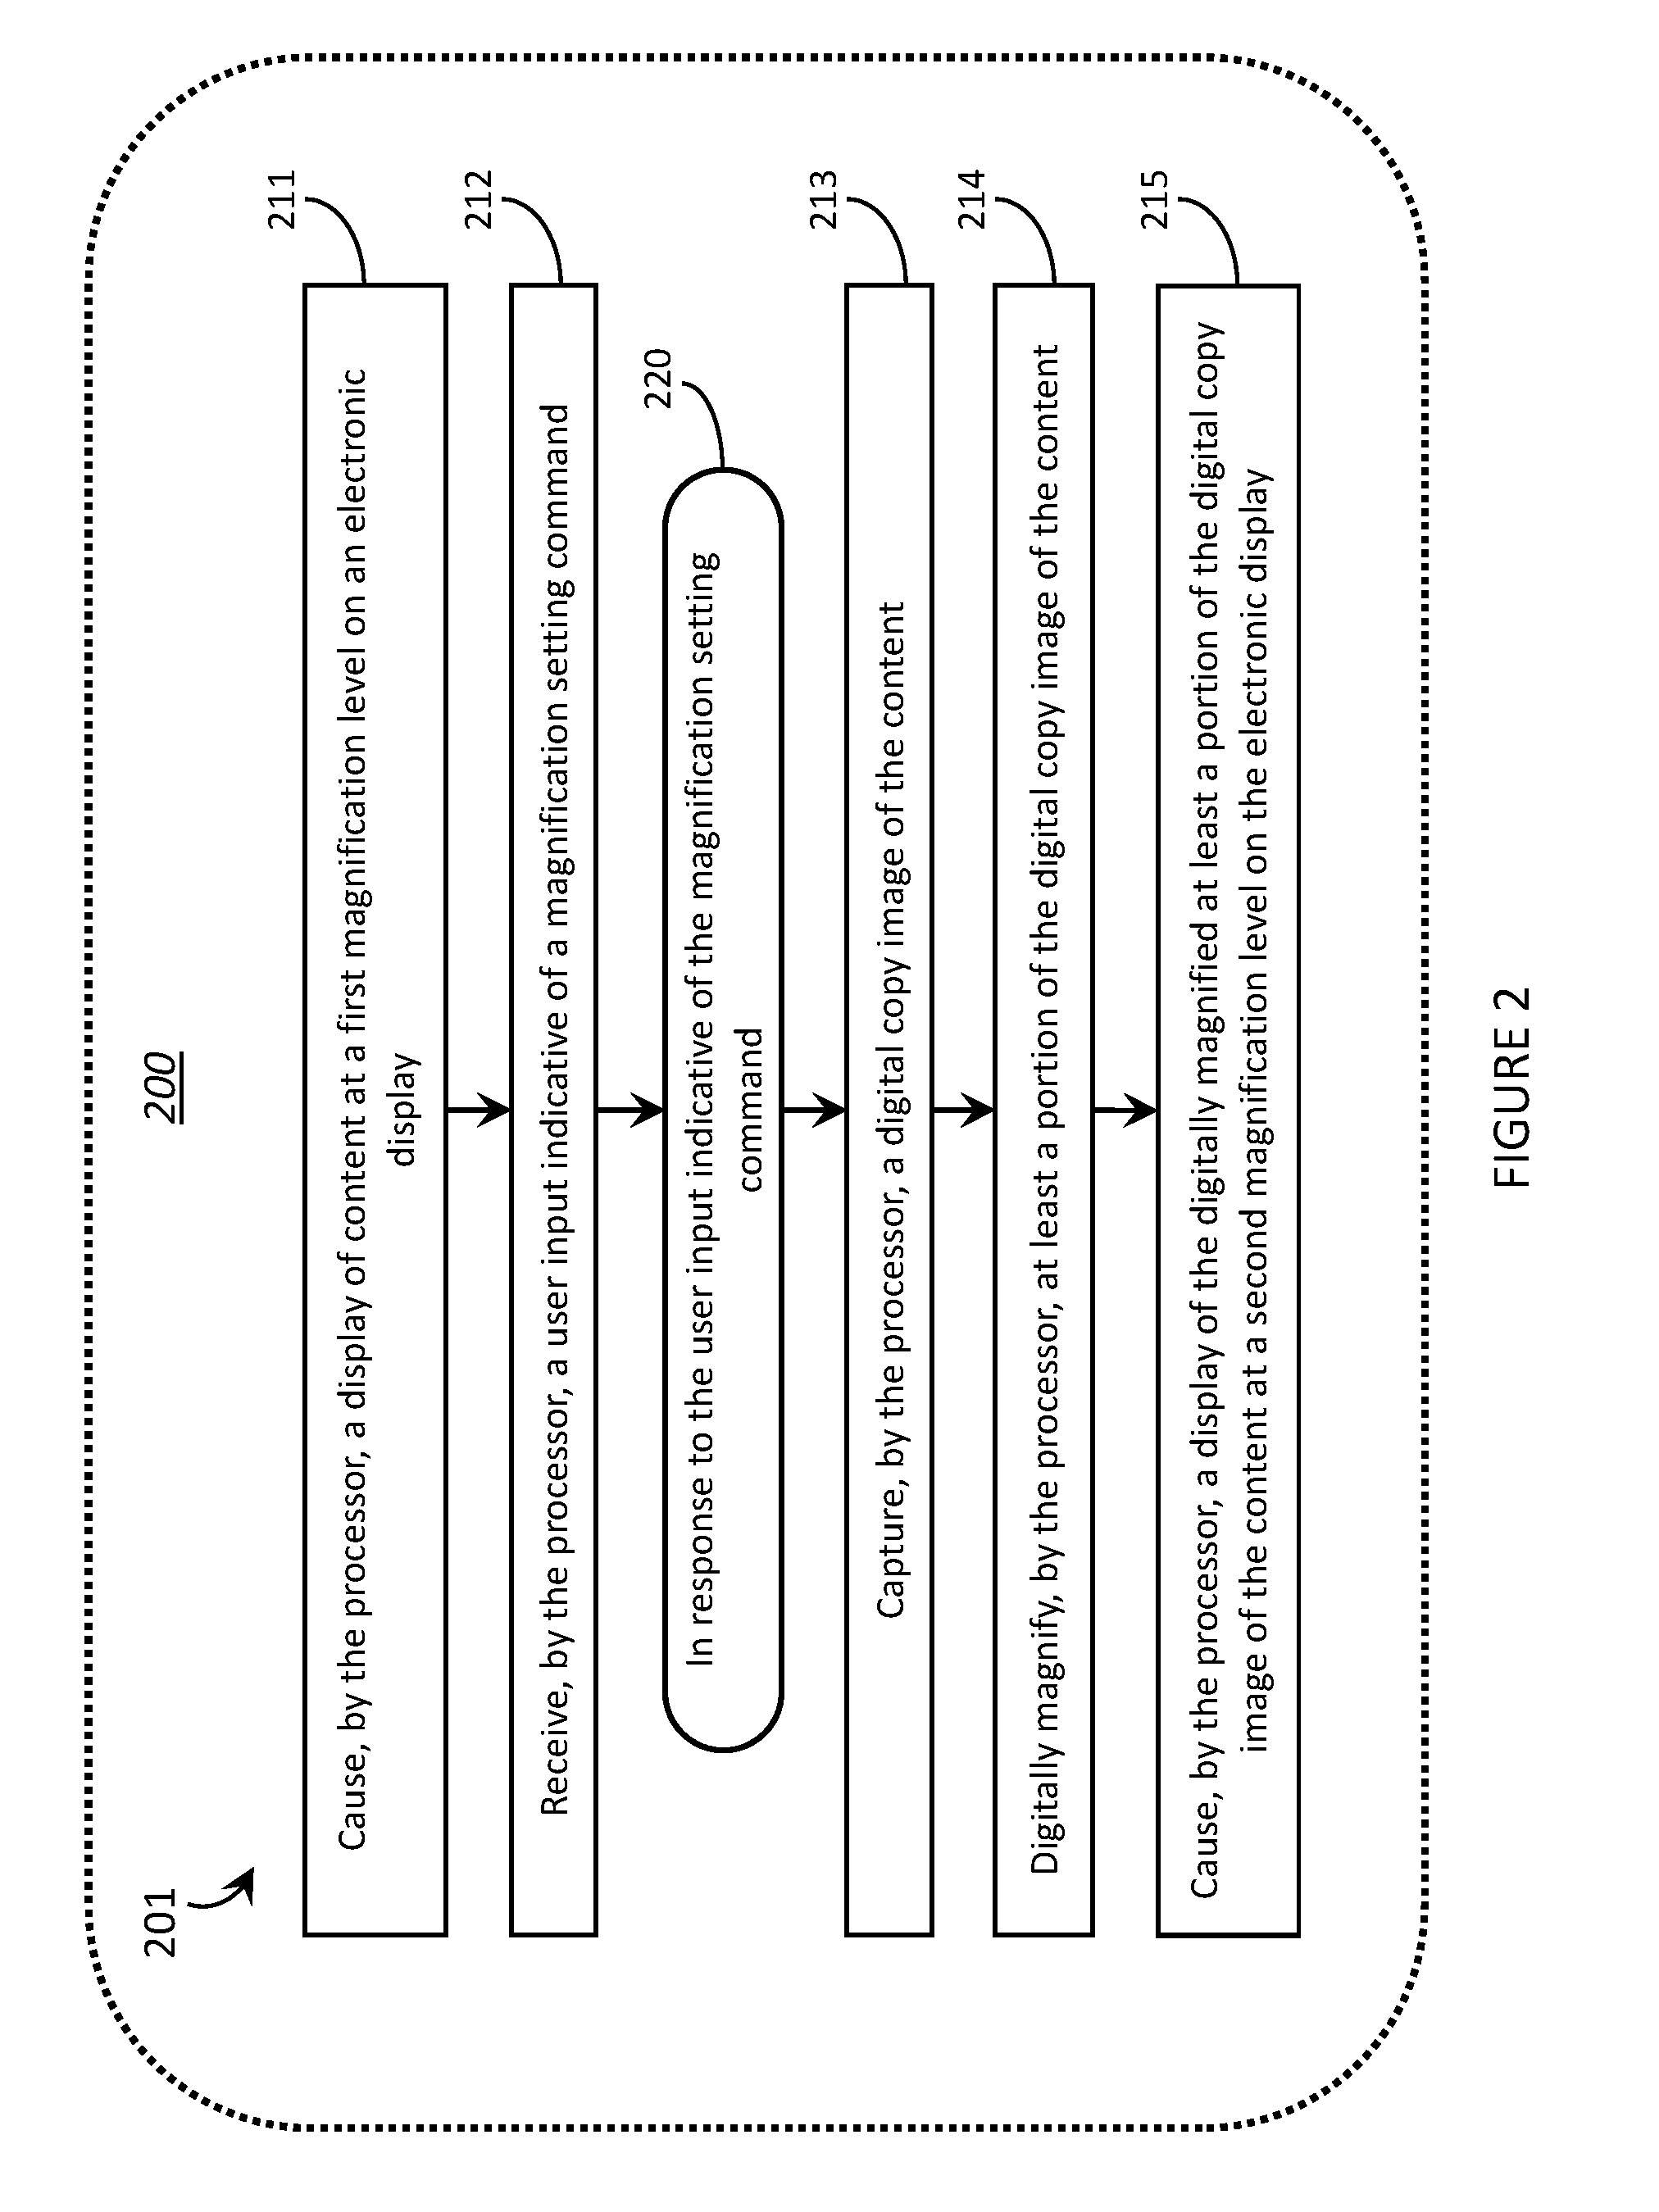 Systems, methods, and computer program products for interacting with electronically displayed presentation materials